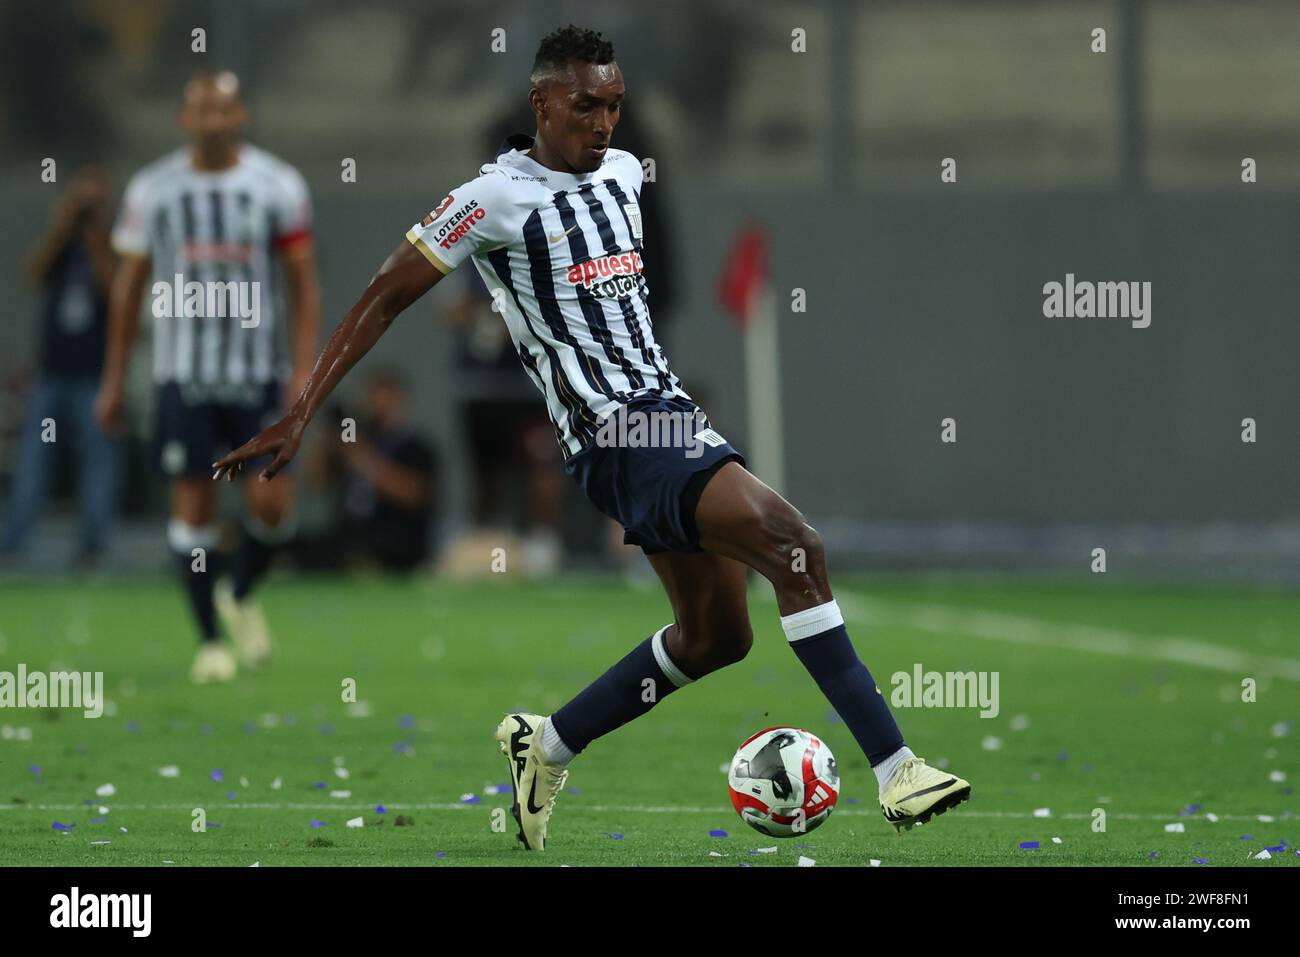 Jiovany Ramos of Alianza Lima during the Liga 1 match between Alianza de Lima and Cesar Vallejo played at Nacional Stadium on January 28, 2024 in Lima, Peru. (Photo by Miguel Marrufo / PRESSINPHOTO) Stock Photo